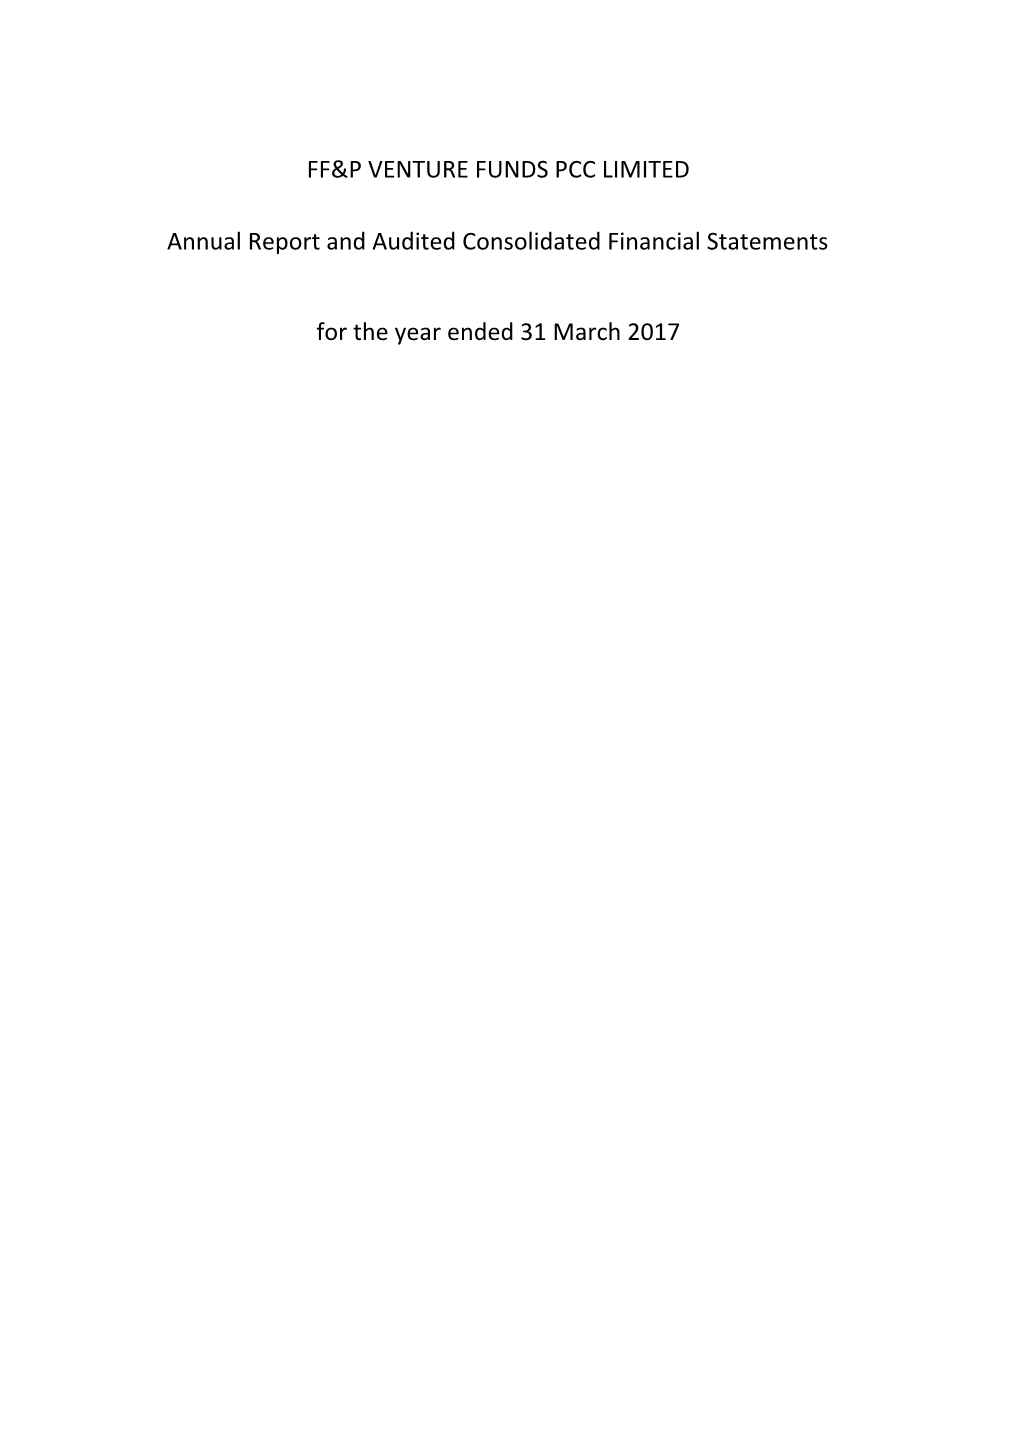 FF&P VENTURE FUNDS PCC LIMITED Annual Report And